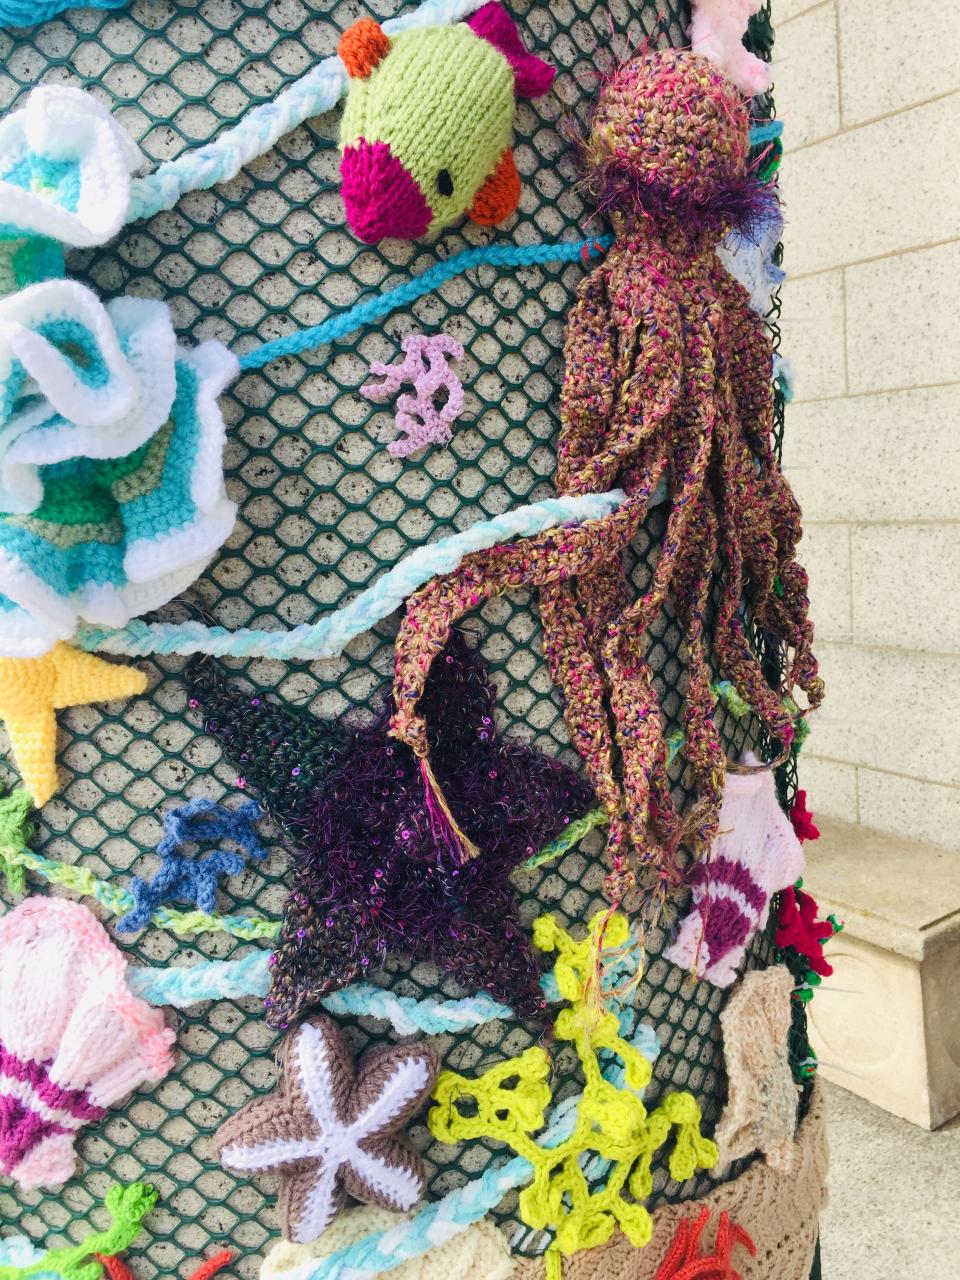 Sea creatures made out of yarn are part of this year's Yarn Pop exhibit in Plymouth.